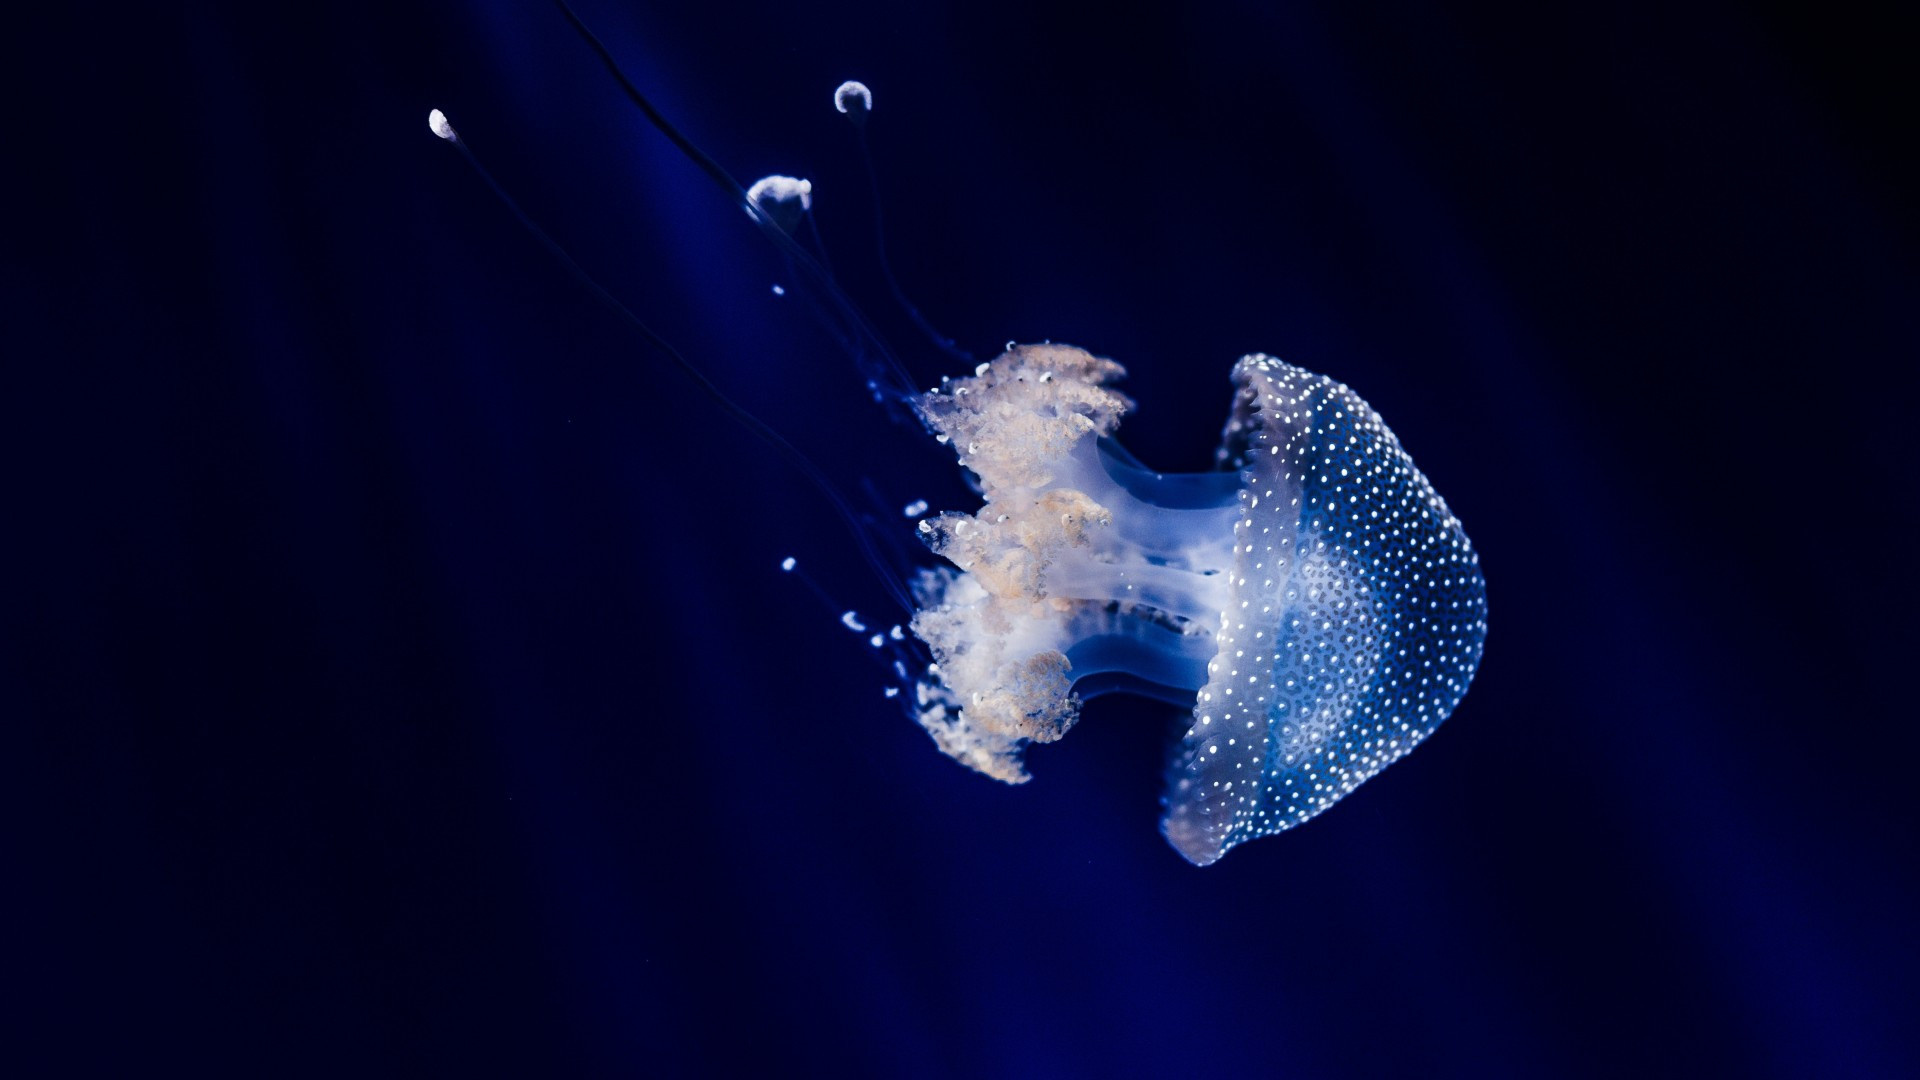 Underwater jellyfish wallpapers, Wide-screen imagery, Marine beauty, Captivating backgrounds, 1920x1080 Full HD Desktop